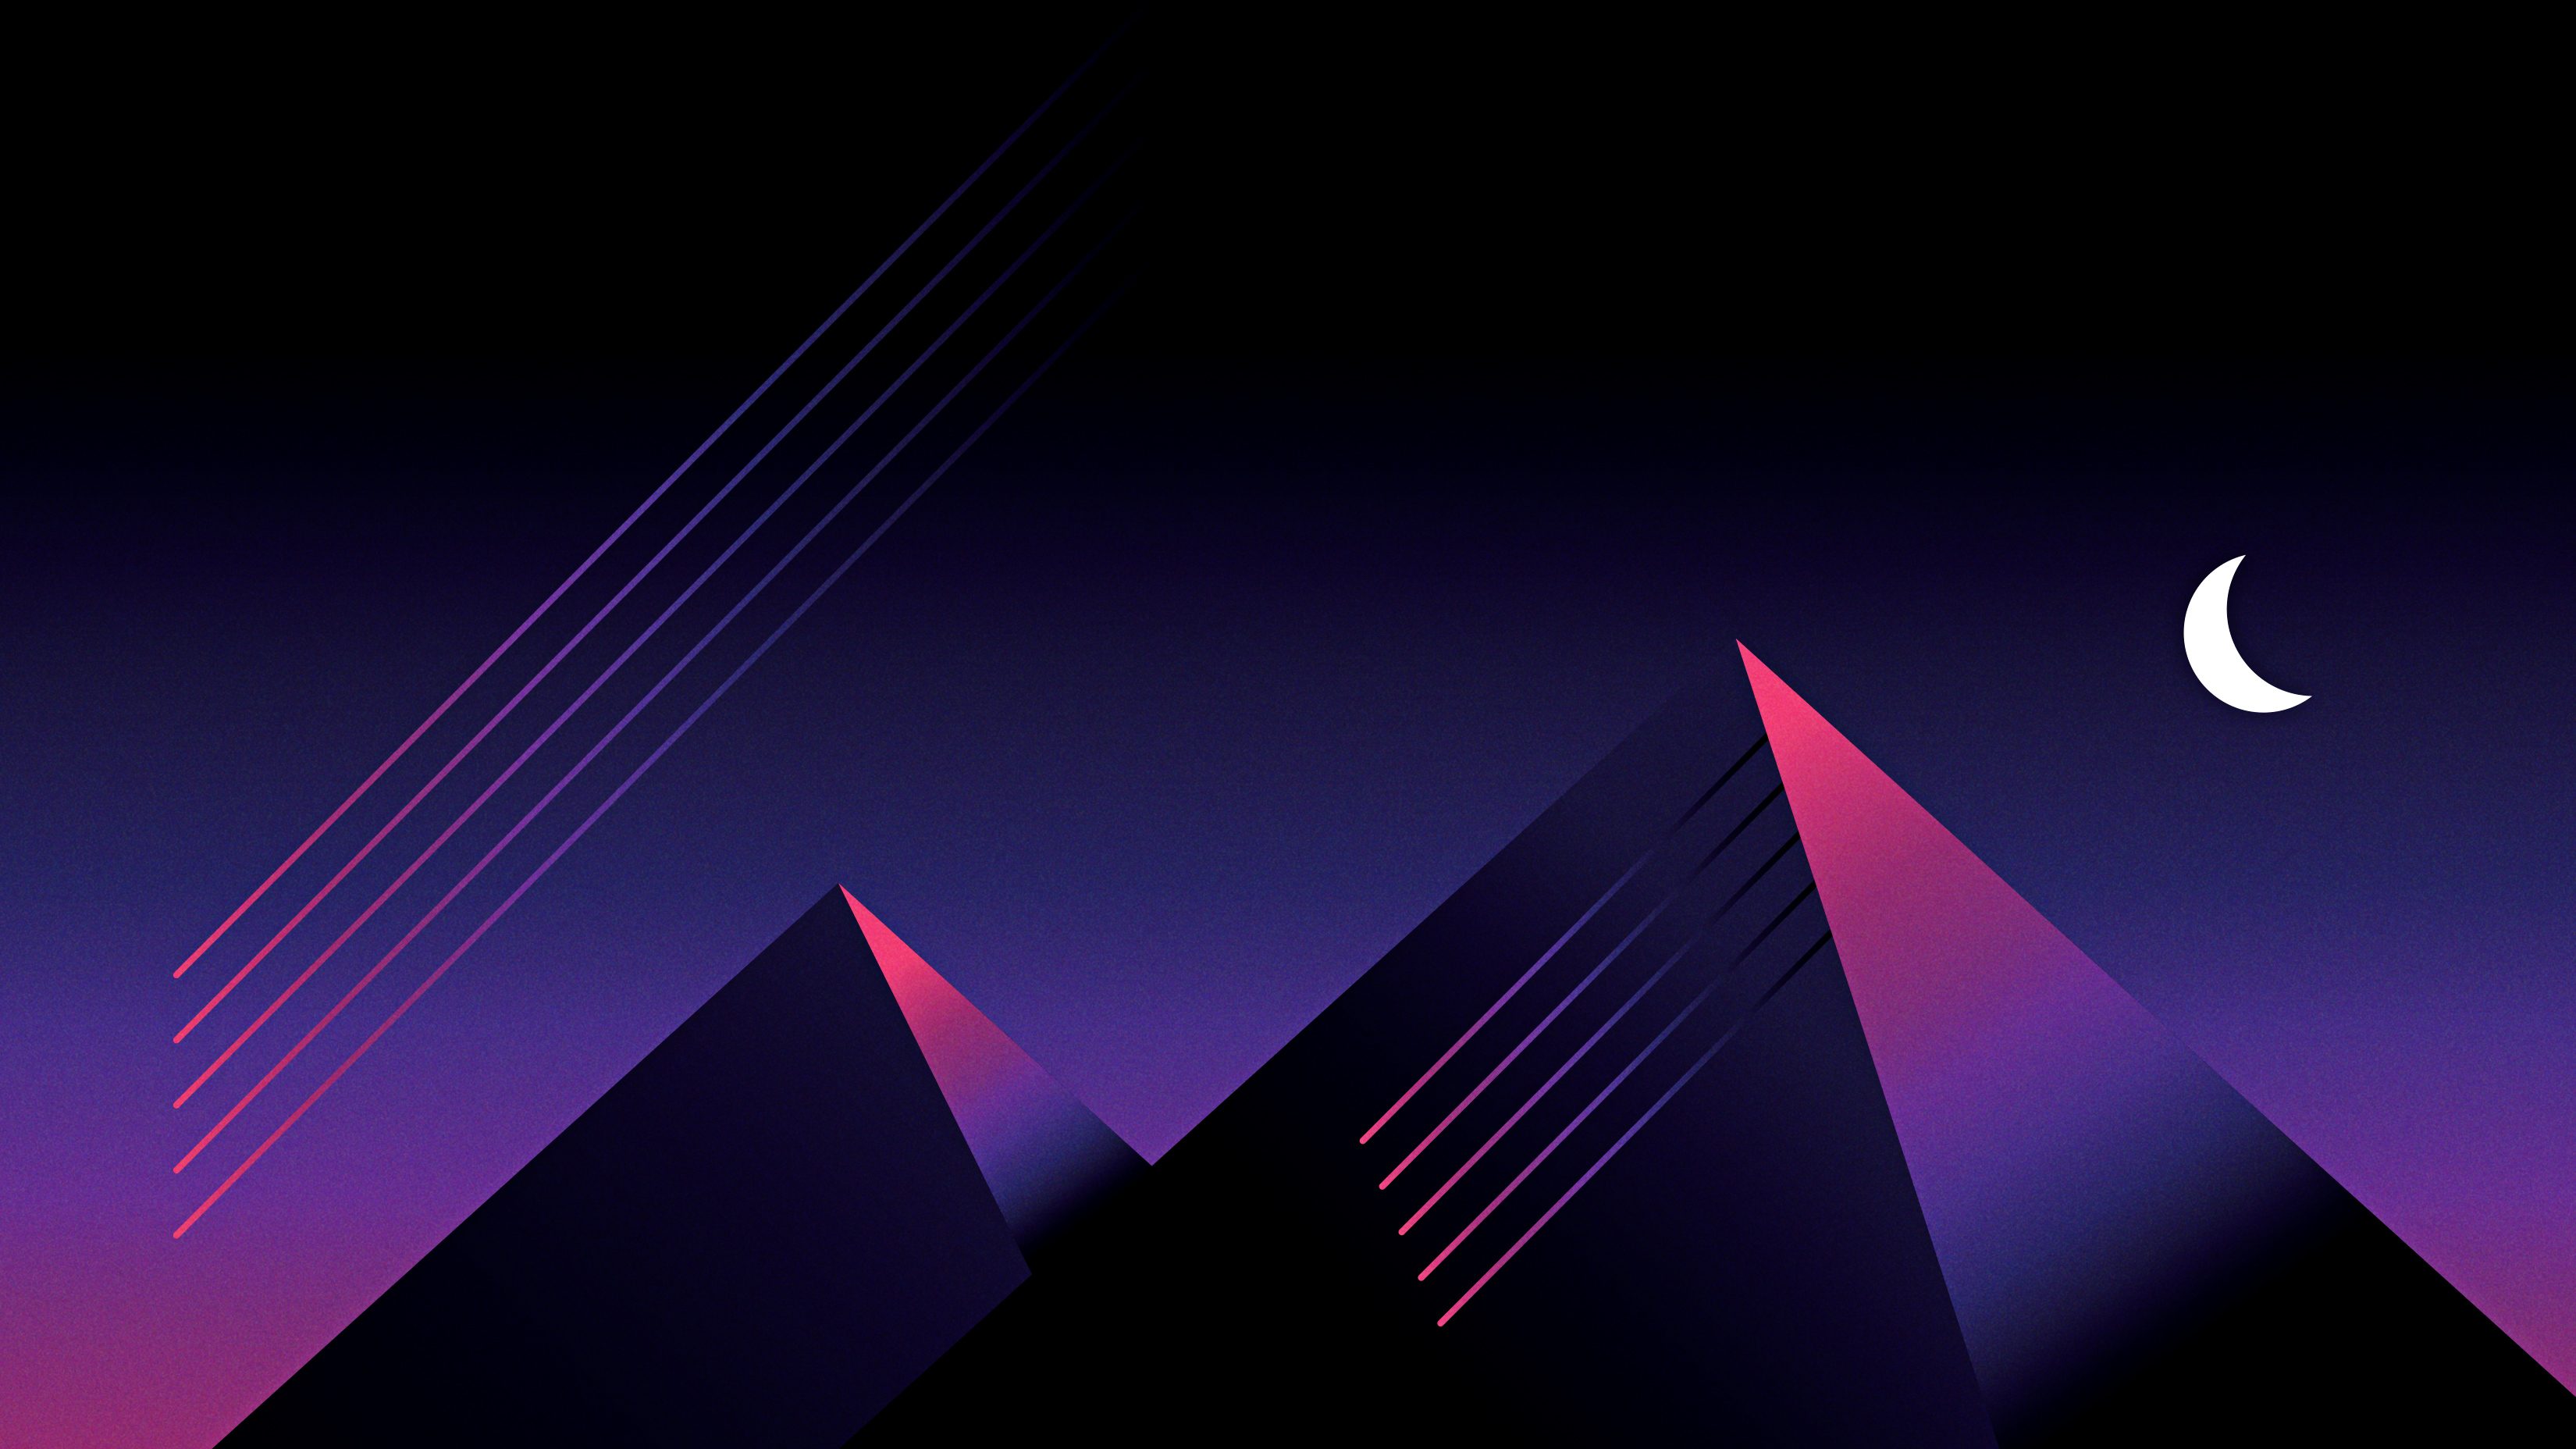 Synthwave 1080P 2k 4k HD wallpapers backgrounds free download  Rare  Gallery